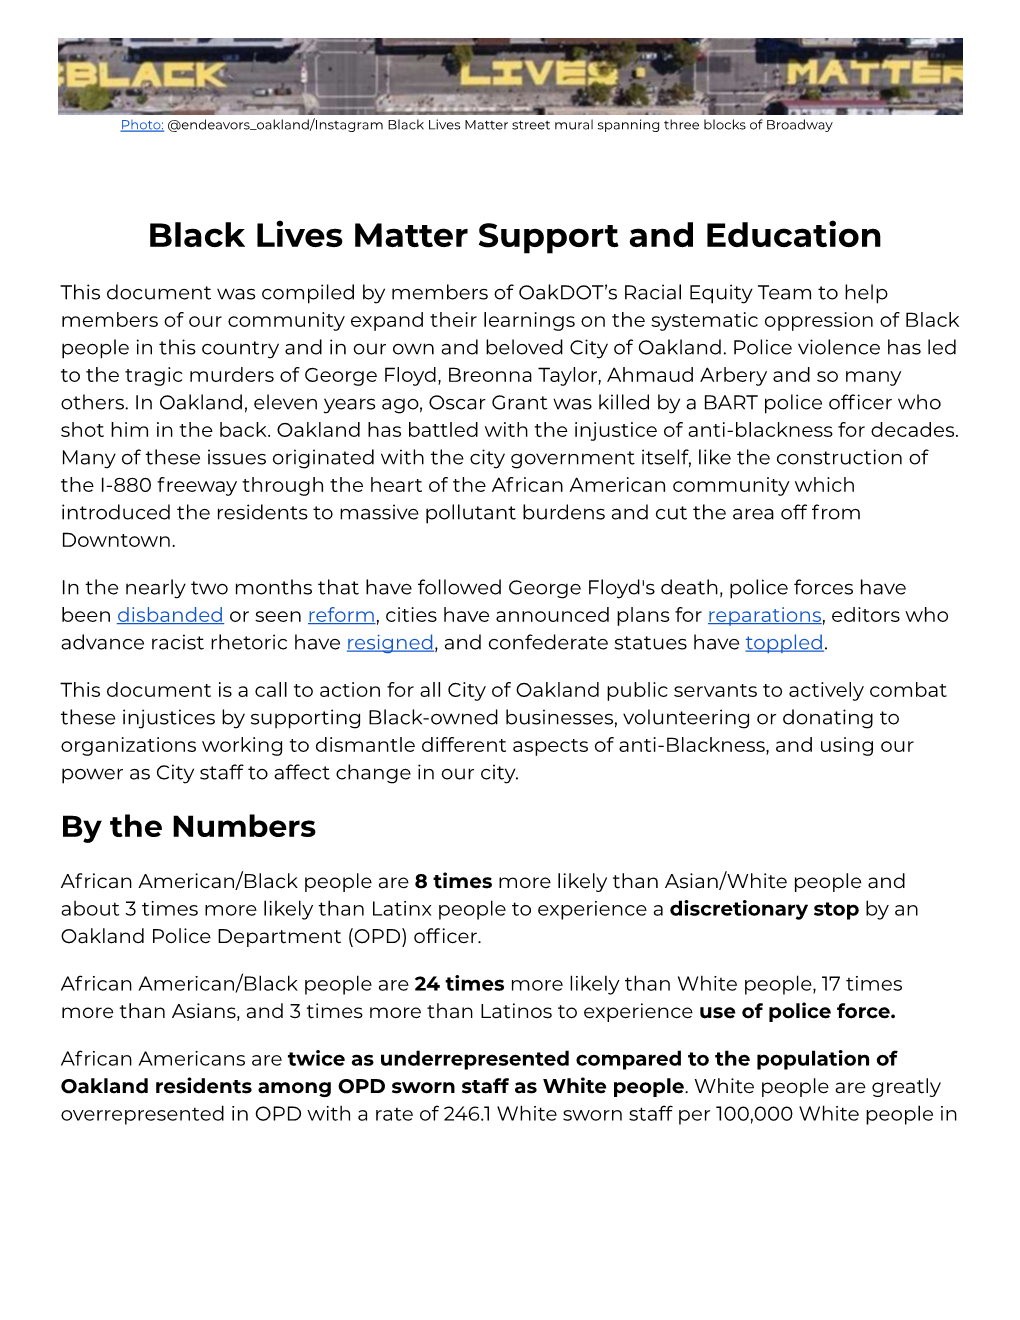 Black Lives Matter Support and Education